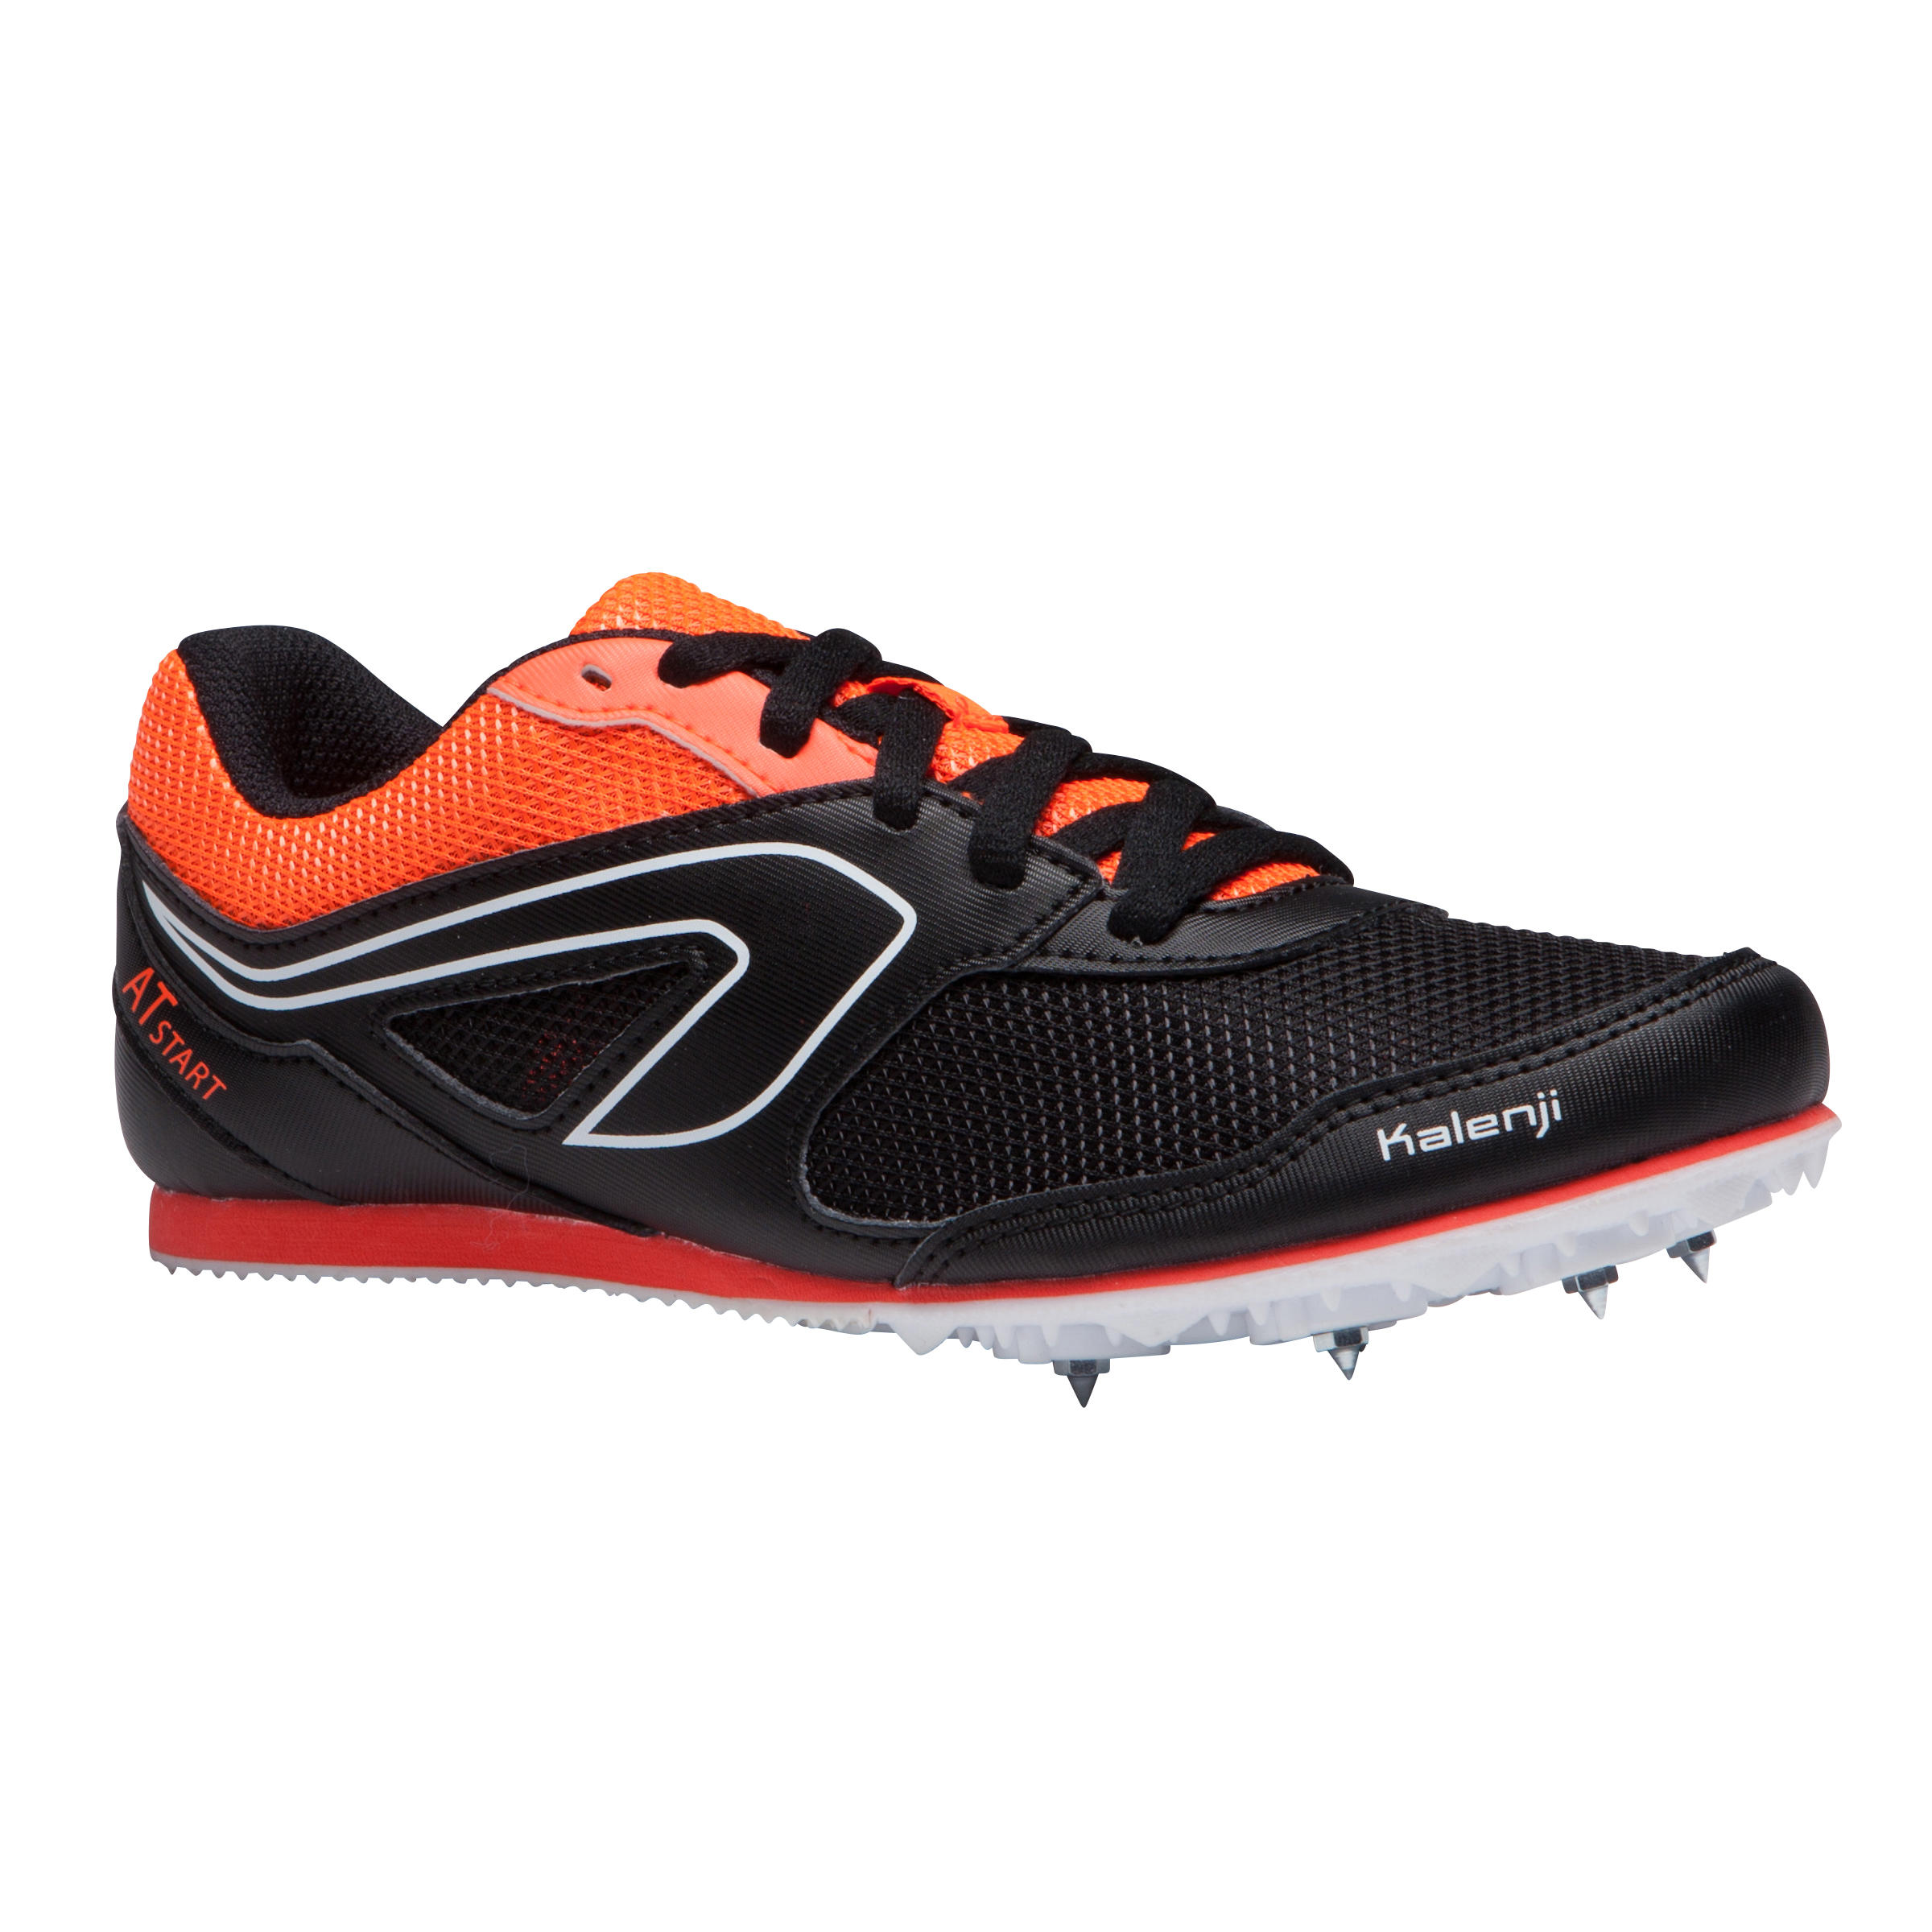 childrens cross country spikes